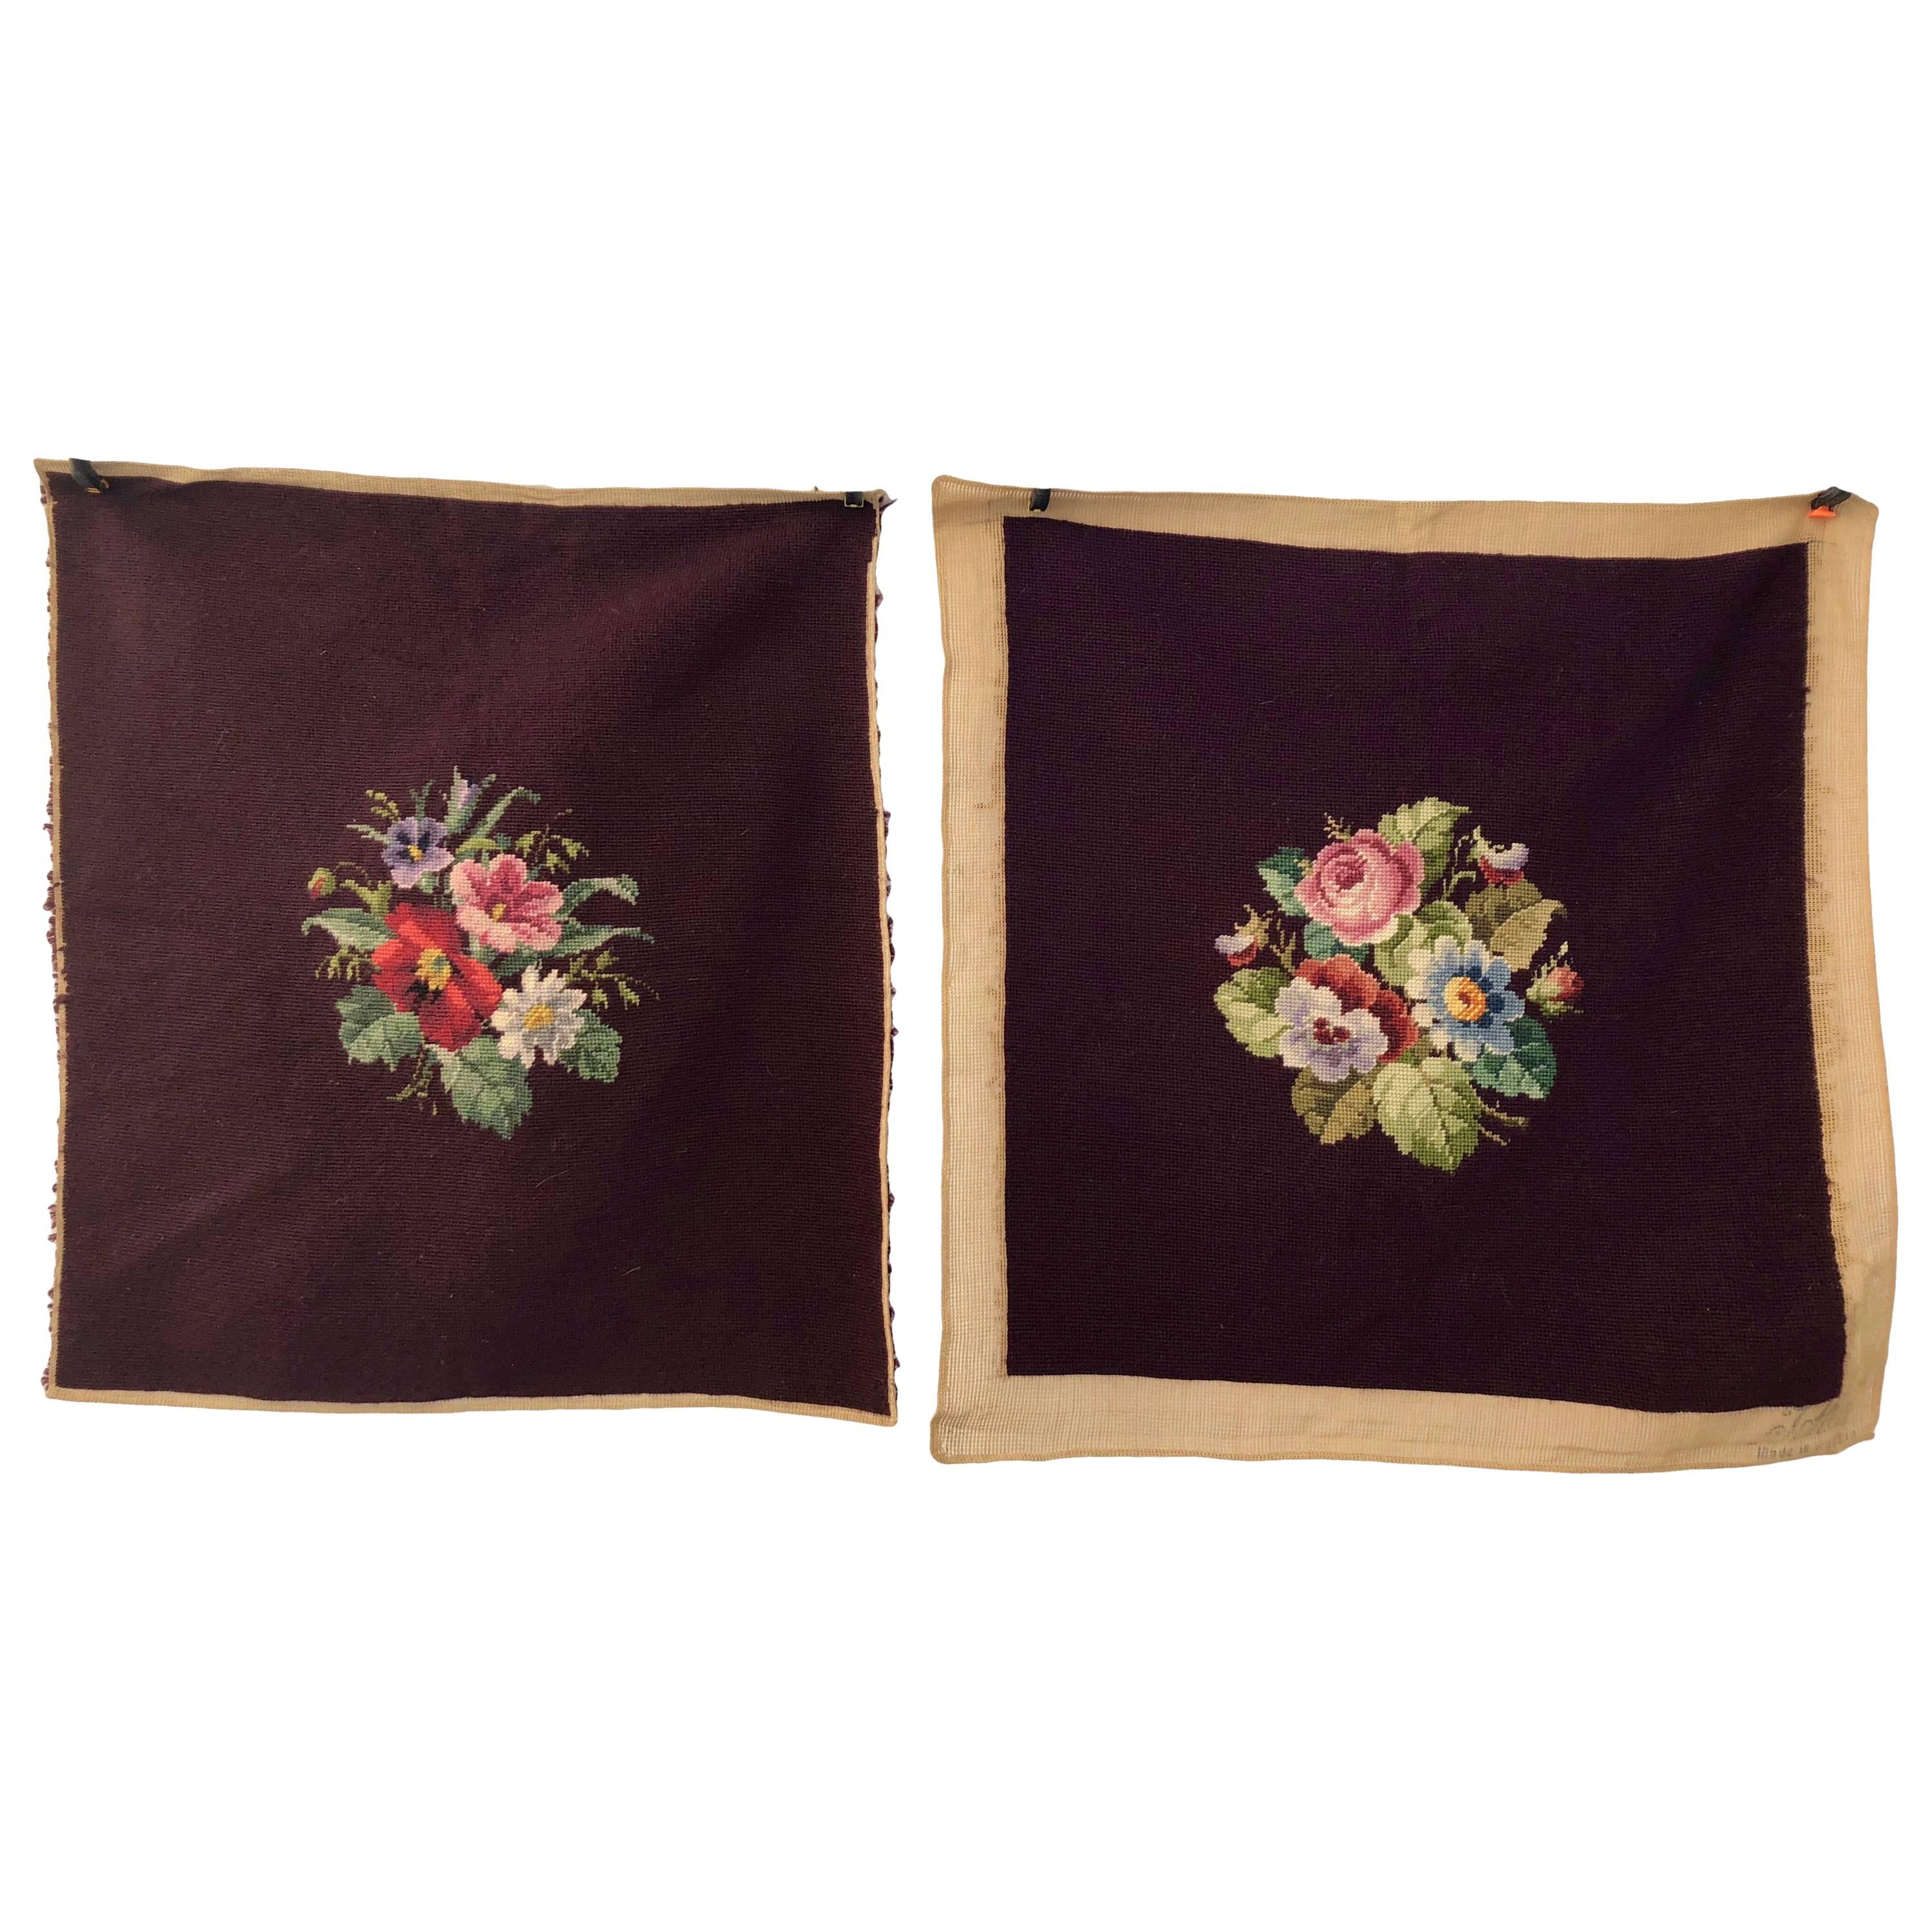 French Antique Needlepoint Pillow or Chair Covers, Plum Color, Set of Two For Sale